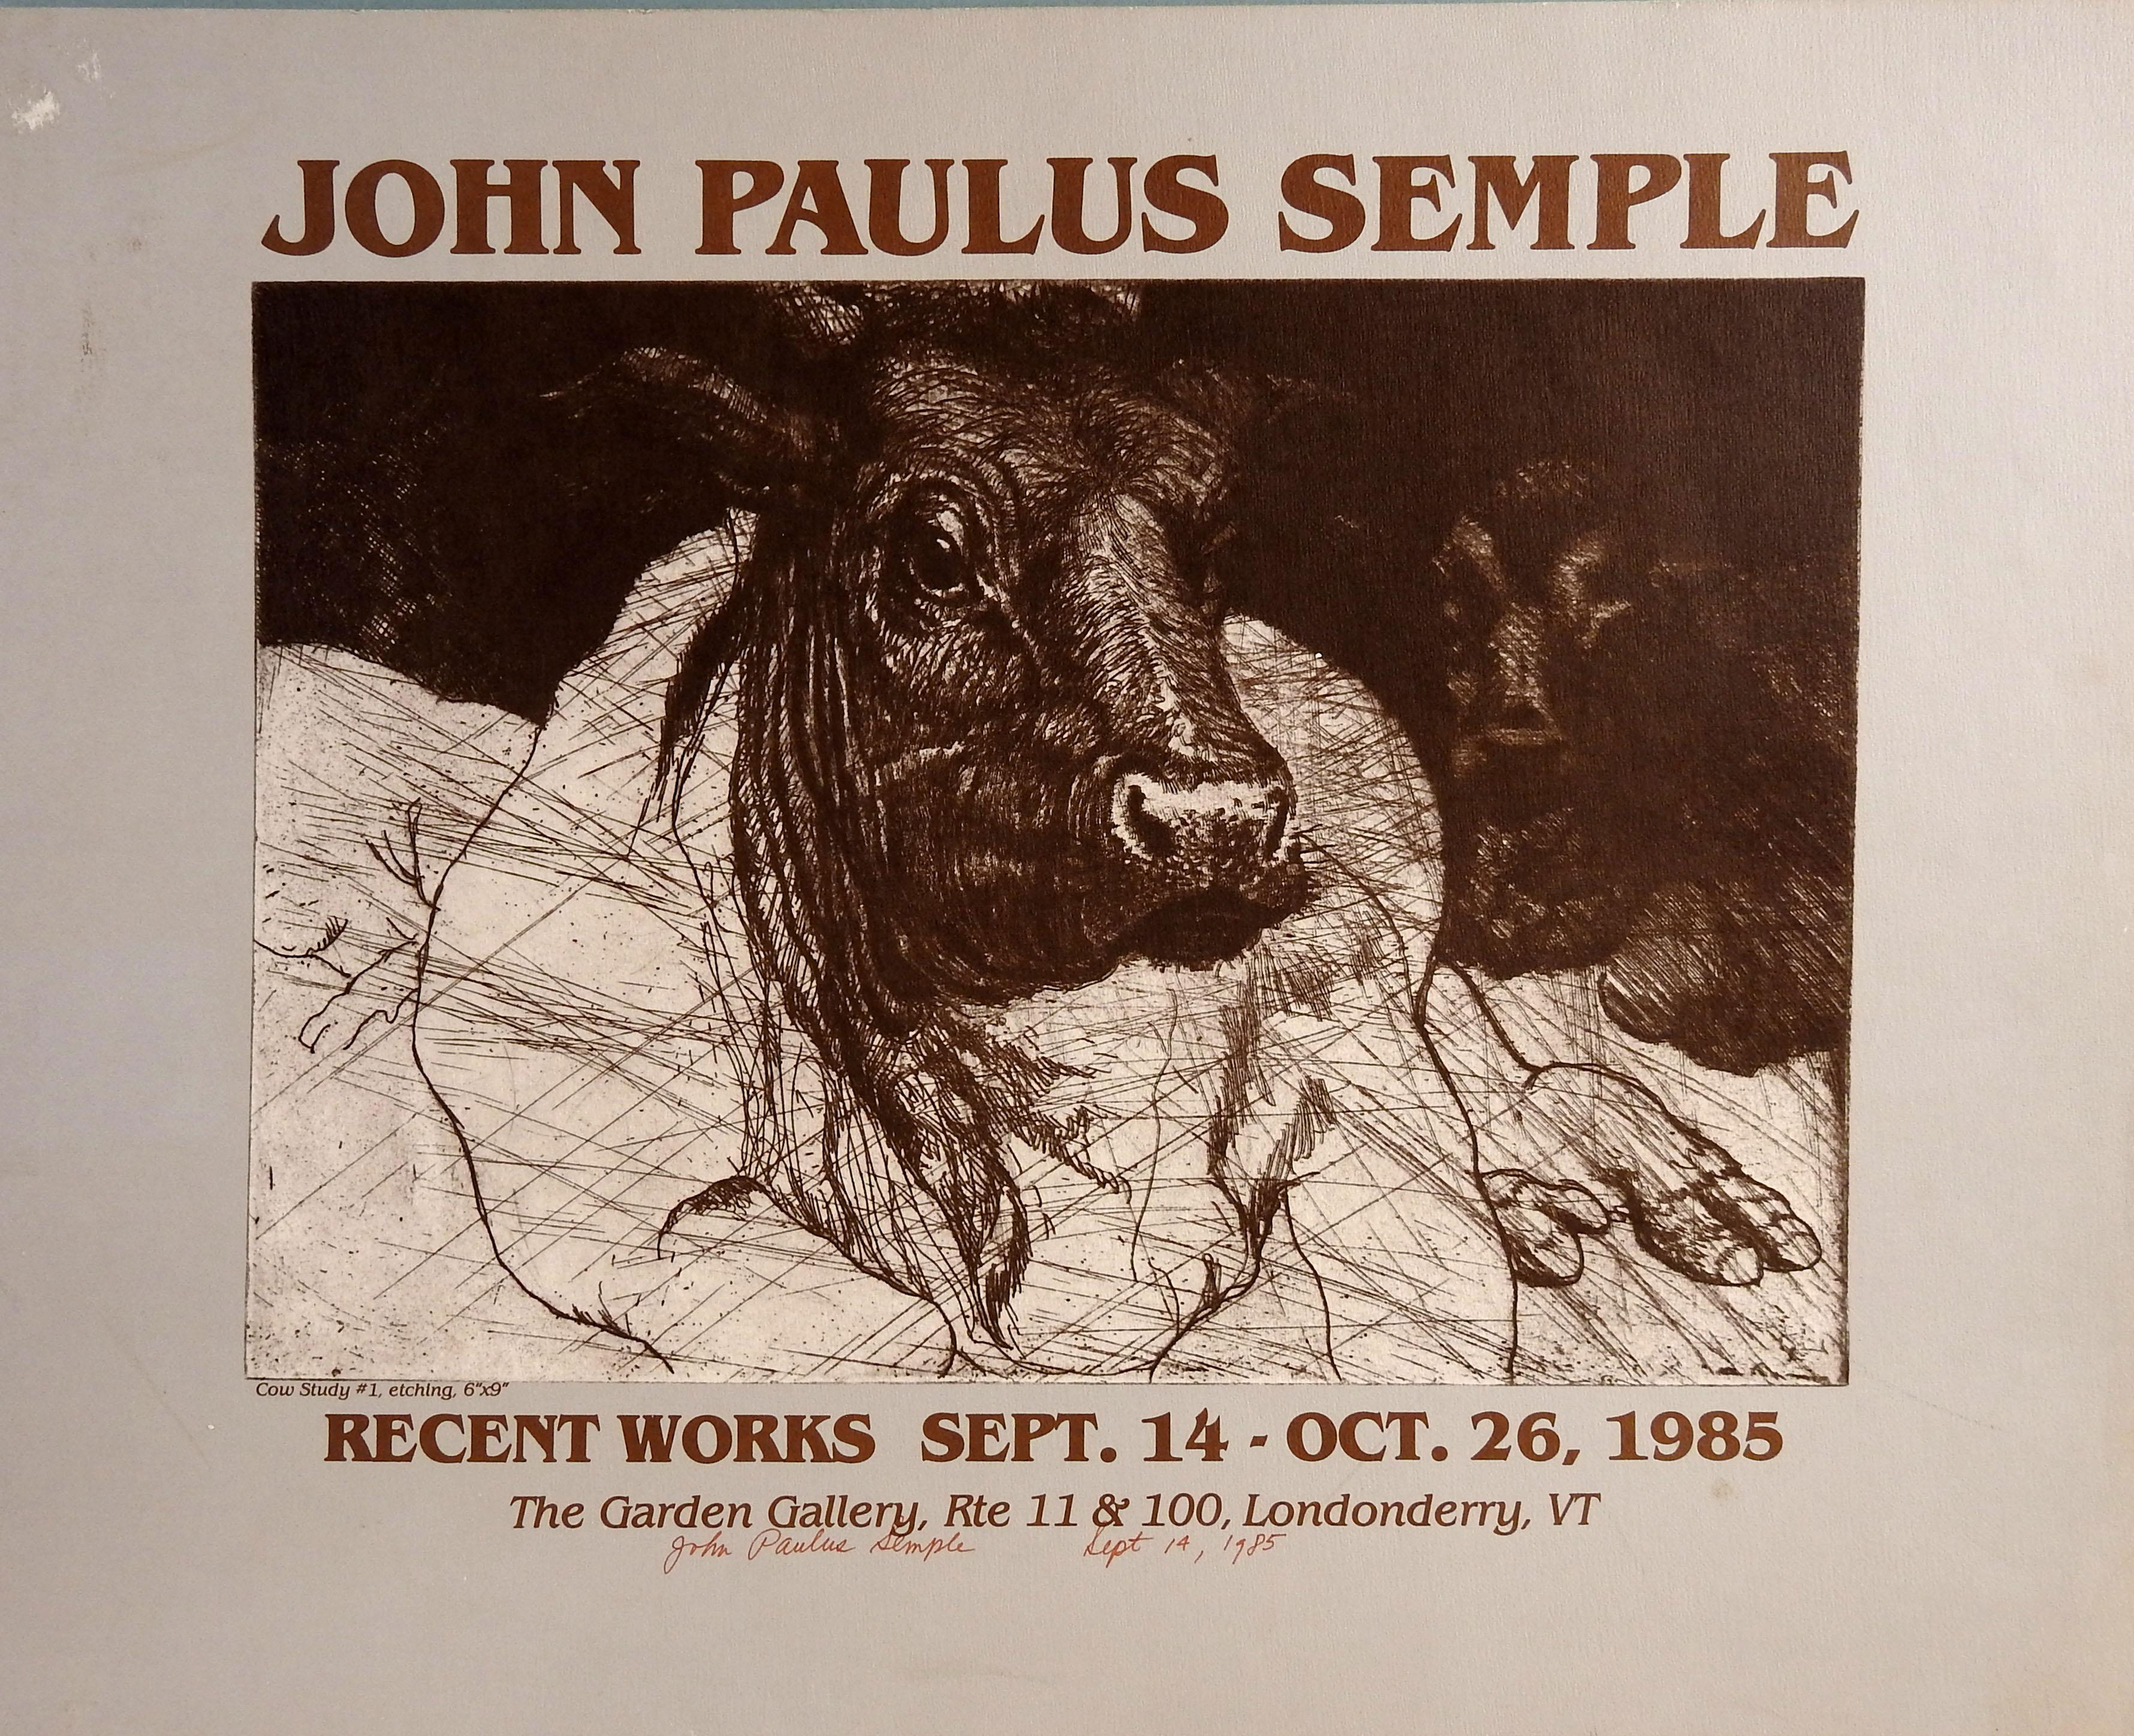 Vintage 1980s Signed John Paulus Semple Poster In Good Condition For Sale In Seguin, TX